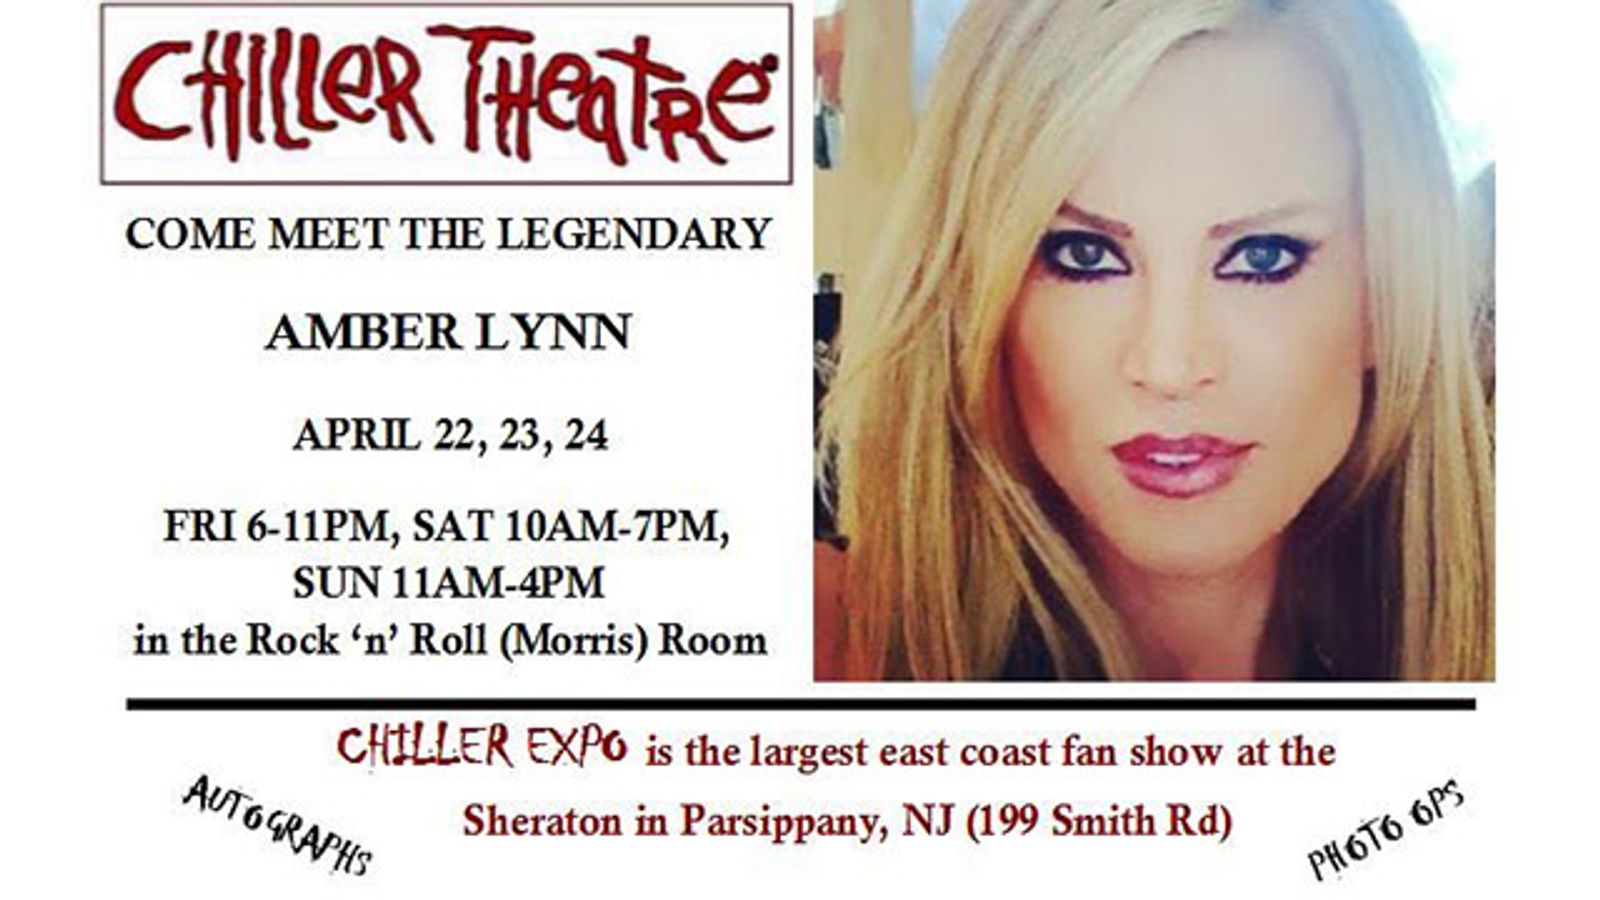 Amber Lynn to Host Rock & Roll Room at Chiller Theatre Expo